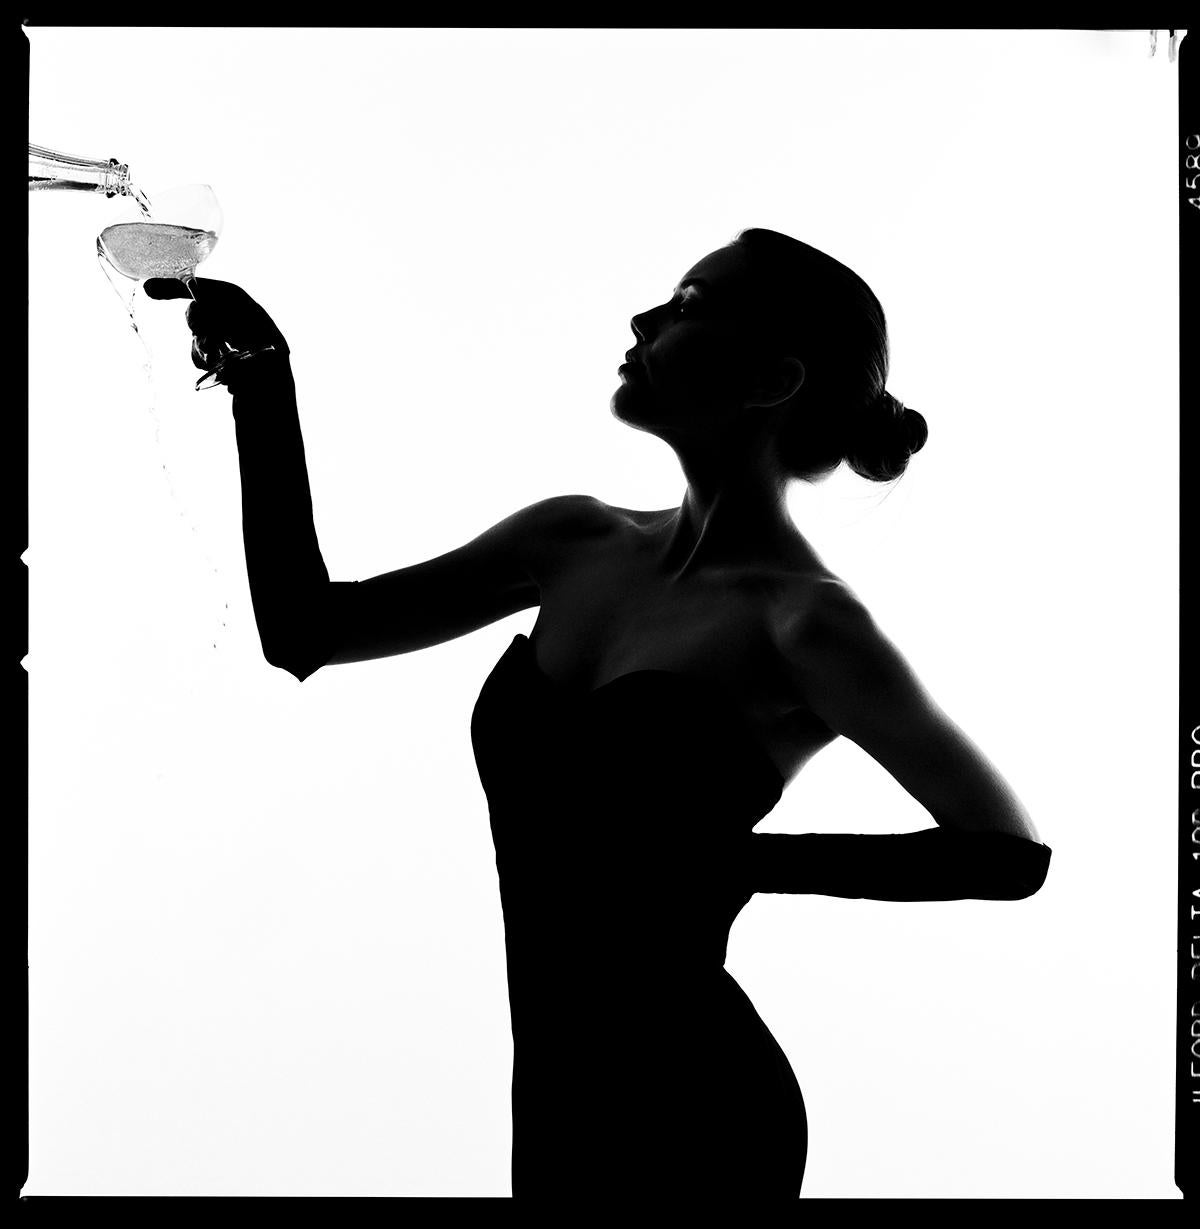 Series: Champagne Pour Silhouette
Chromogenic Print on Kodak Endura Luster Paper
All available sizes and editions:
18" x 18"
30" x 30"
45" x 45"
60" x 60"
70" x 70"
Editions of 3 + 2 Artist Proofs

Tyler Shields is a photographer, film director, and